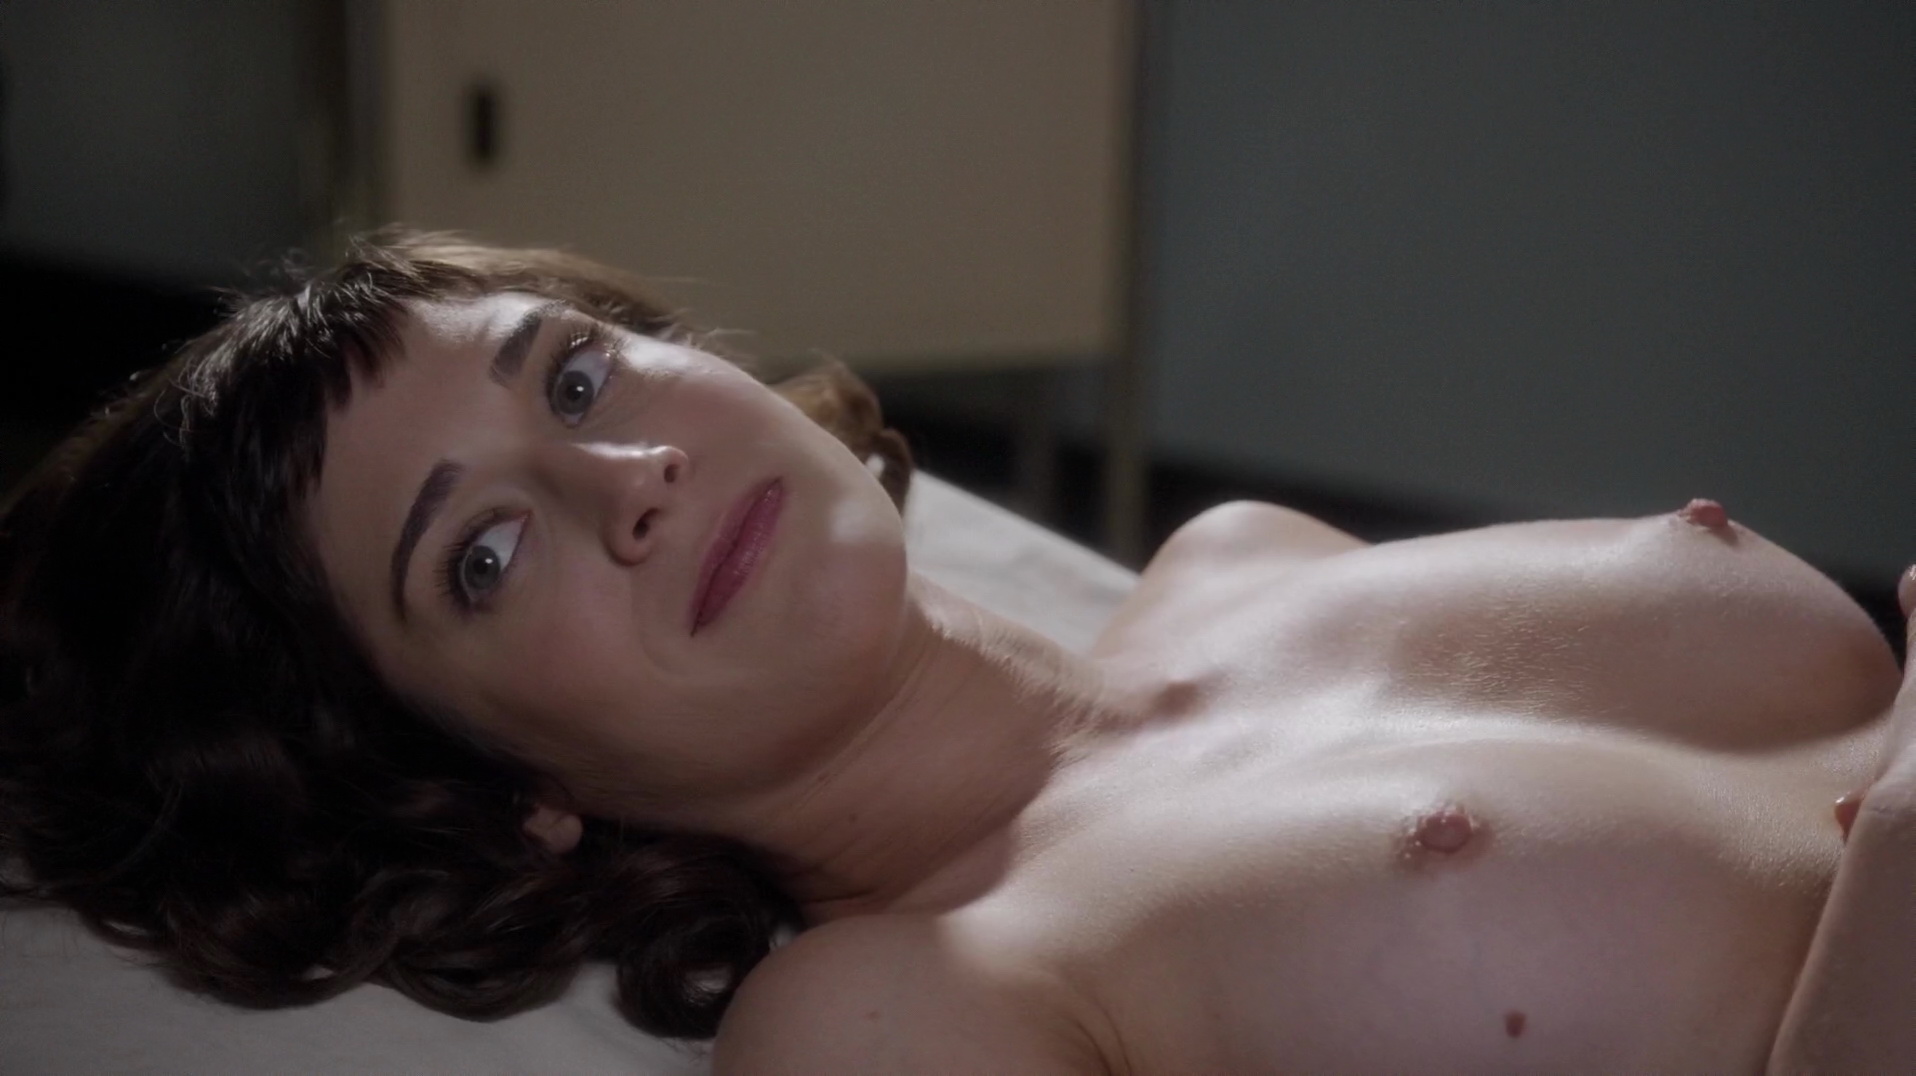 Lizzy Caplan Topless On Beach - Watch Online - Lizzy Caplan â€“ Masters of Sex s01e09 (2013 ...